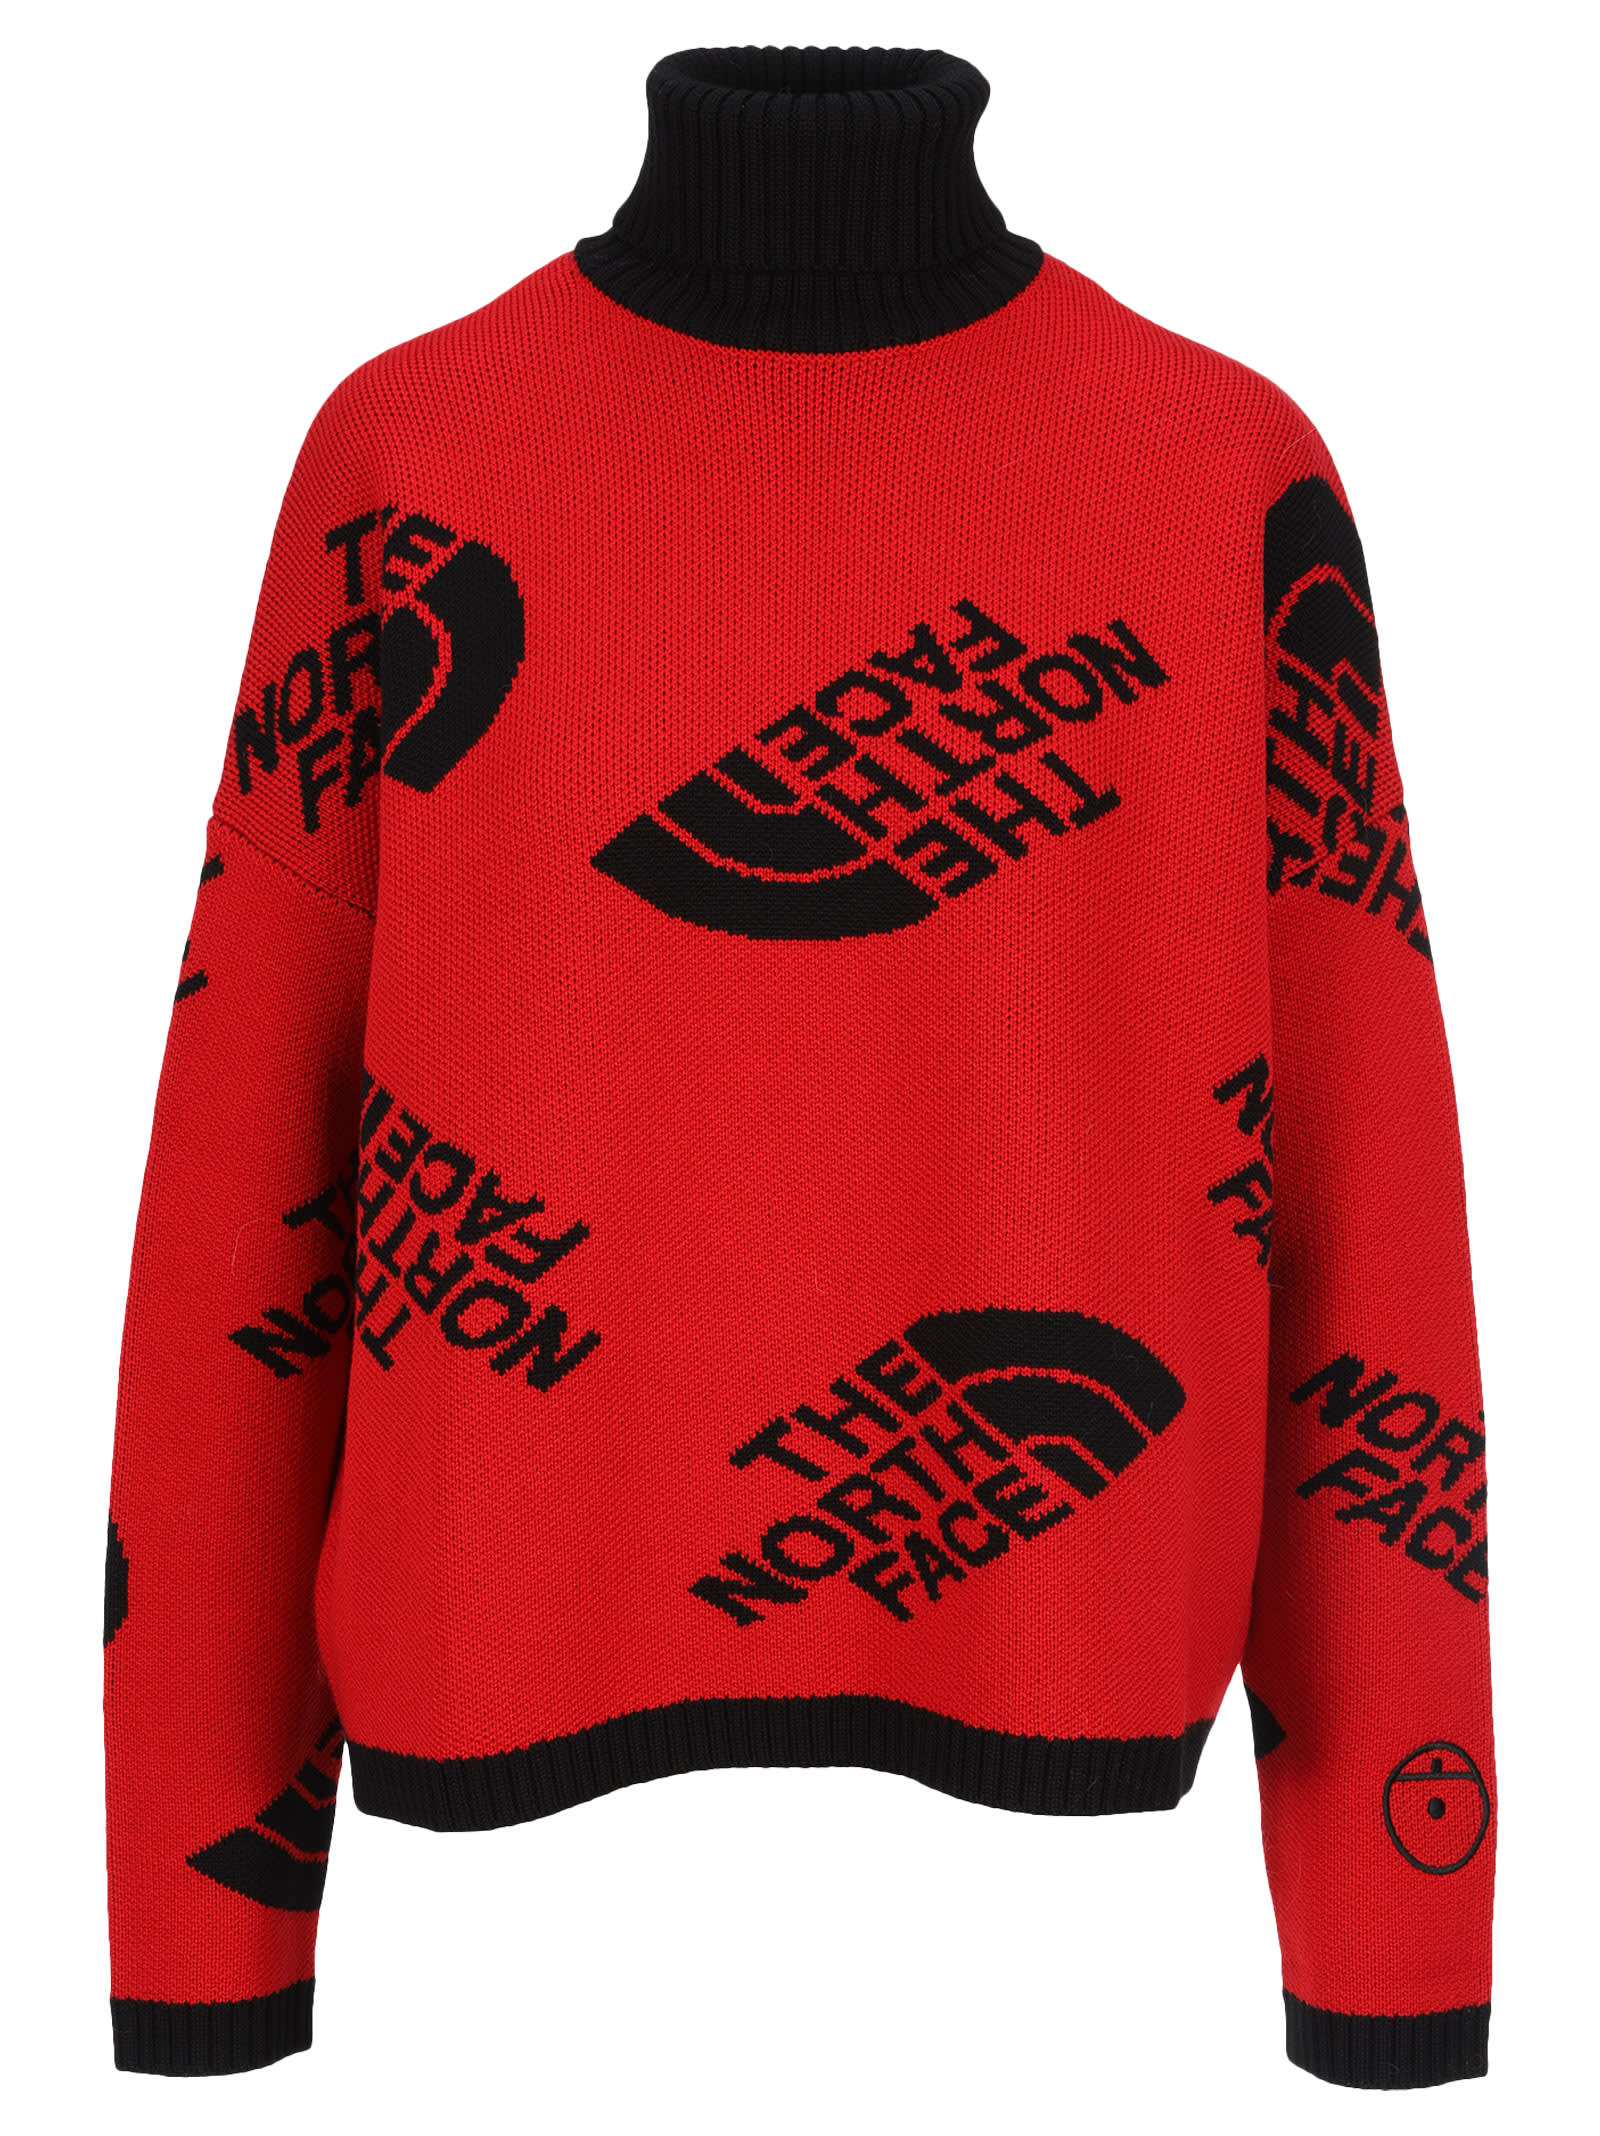 north face red jumper